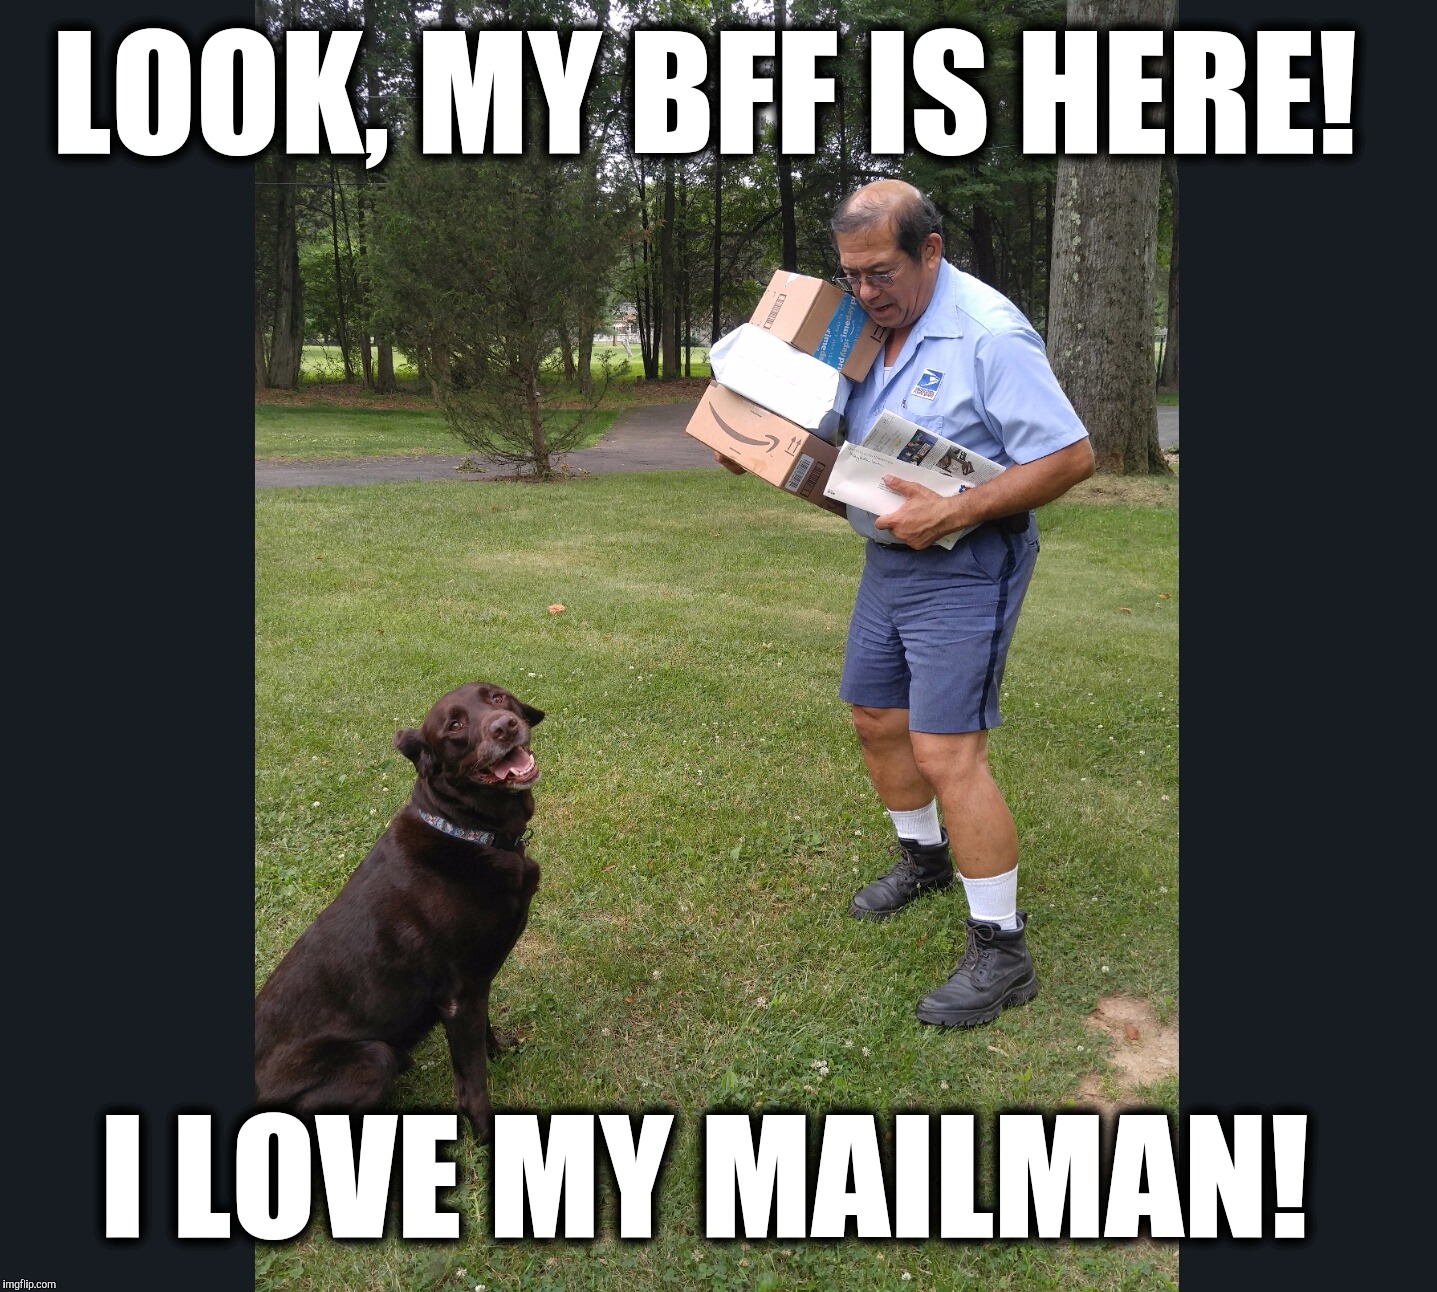 My BFF is the mailman!  | LOOK, MY BFF IS HERE! I LOVE MY MAILMAN! | image tagged in chuckie the chocolate lab,mailman,bffs,funny dog,funny memes,cute dog | made w/ Imgflip meme maker